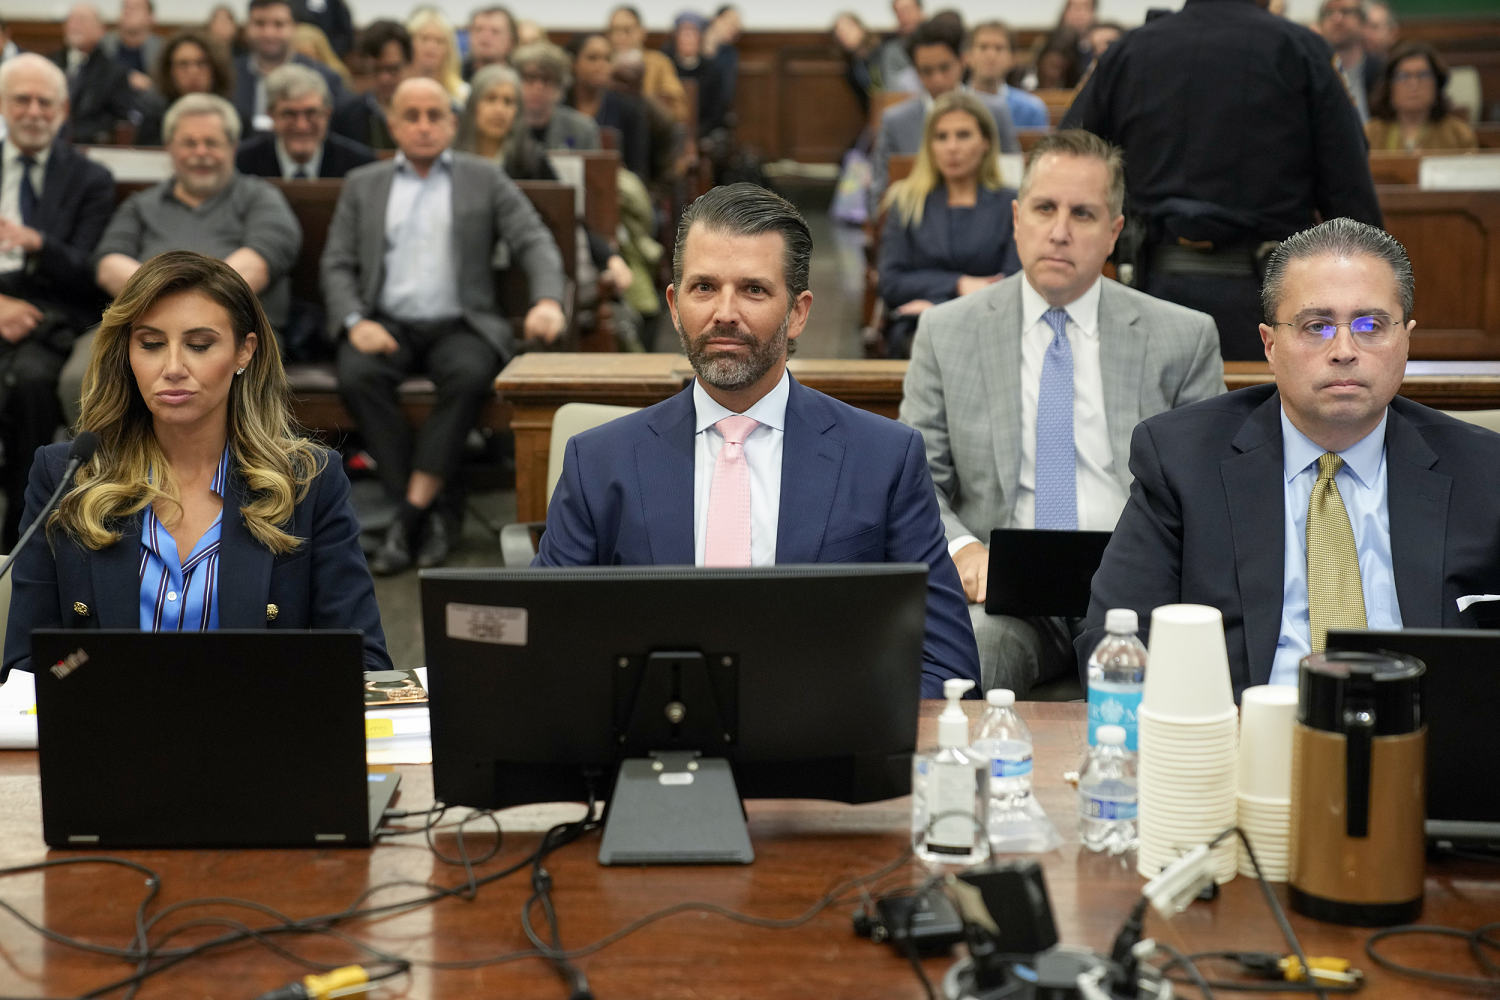 Donald Trump Jr. testifies his family ‘relied heavily’ on company’s accountant